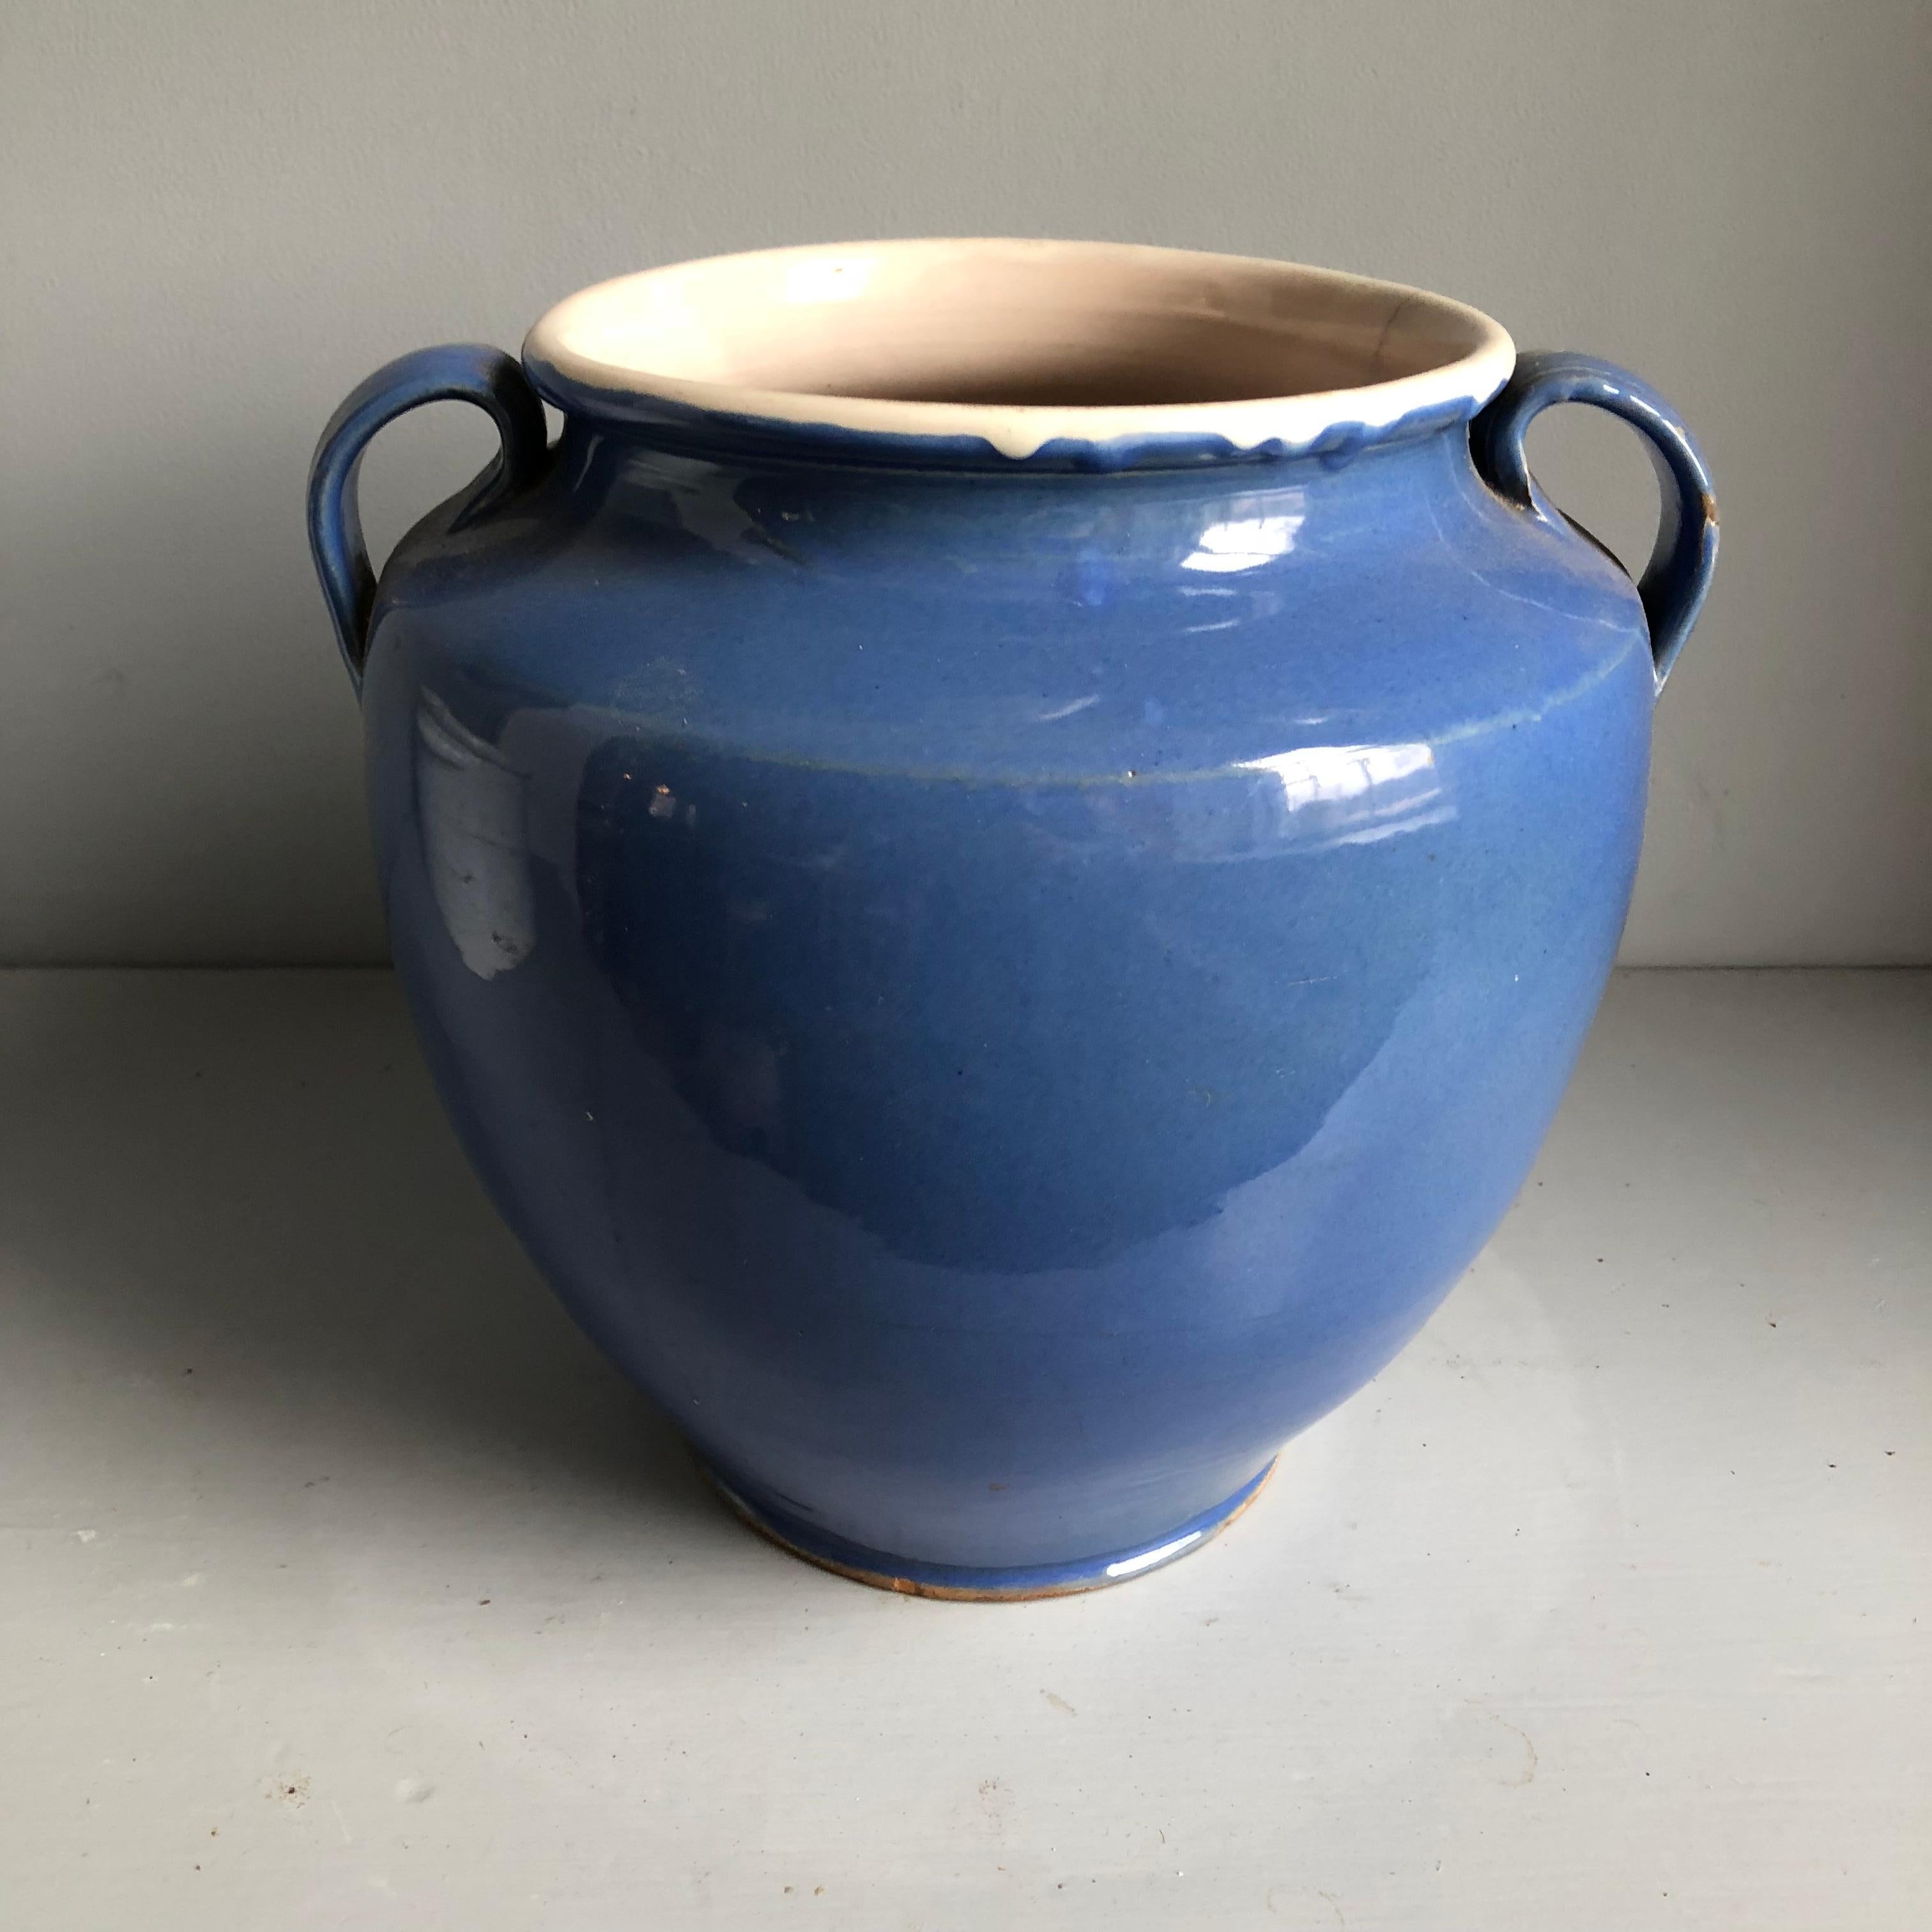 A blue-glazed French Faience confit pot, circa 1870 with 2 handles.